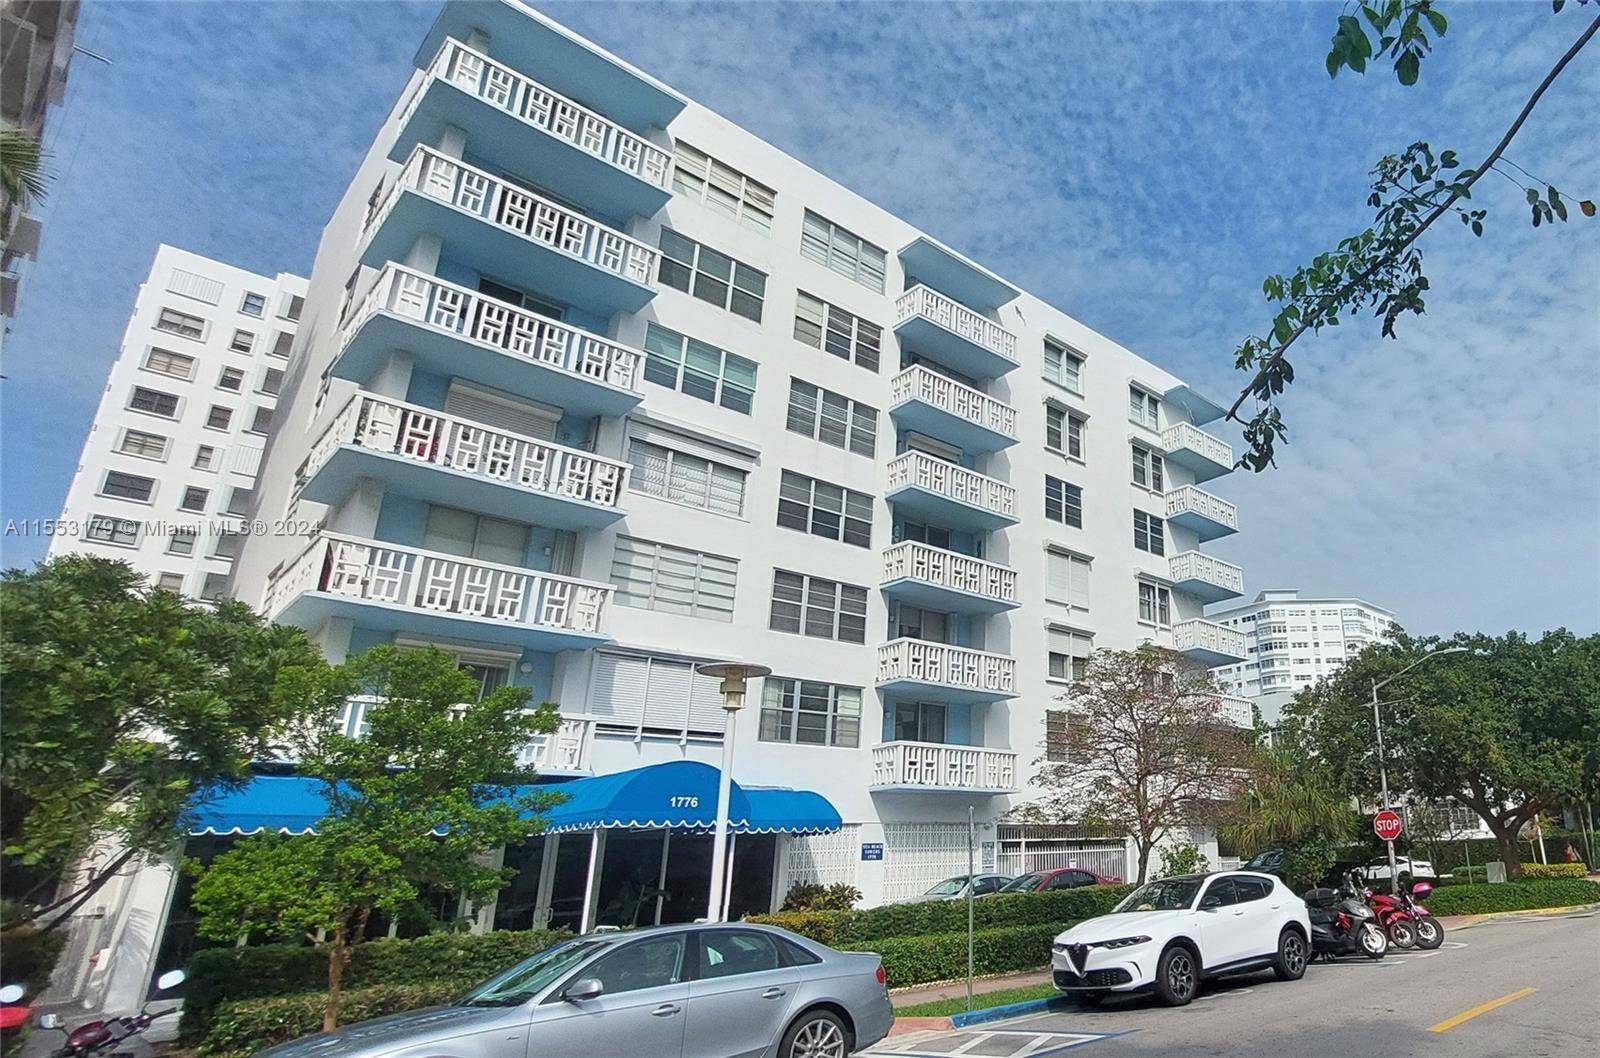 LARGE 1 BR 1 BATH 800 SF OPEN BALCONY MIMO ERA BOUTIQUE STYLE 55 BUILDING IN MIAMI BEACH SPACIOUS LIVING DINING AREA PLANTATION STYLE INTERIOR SHUTERS 1 OPEN PARKING SPACE ...